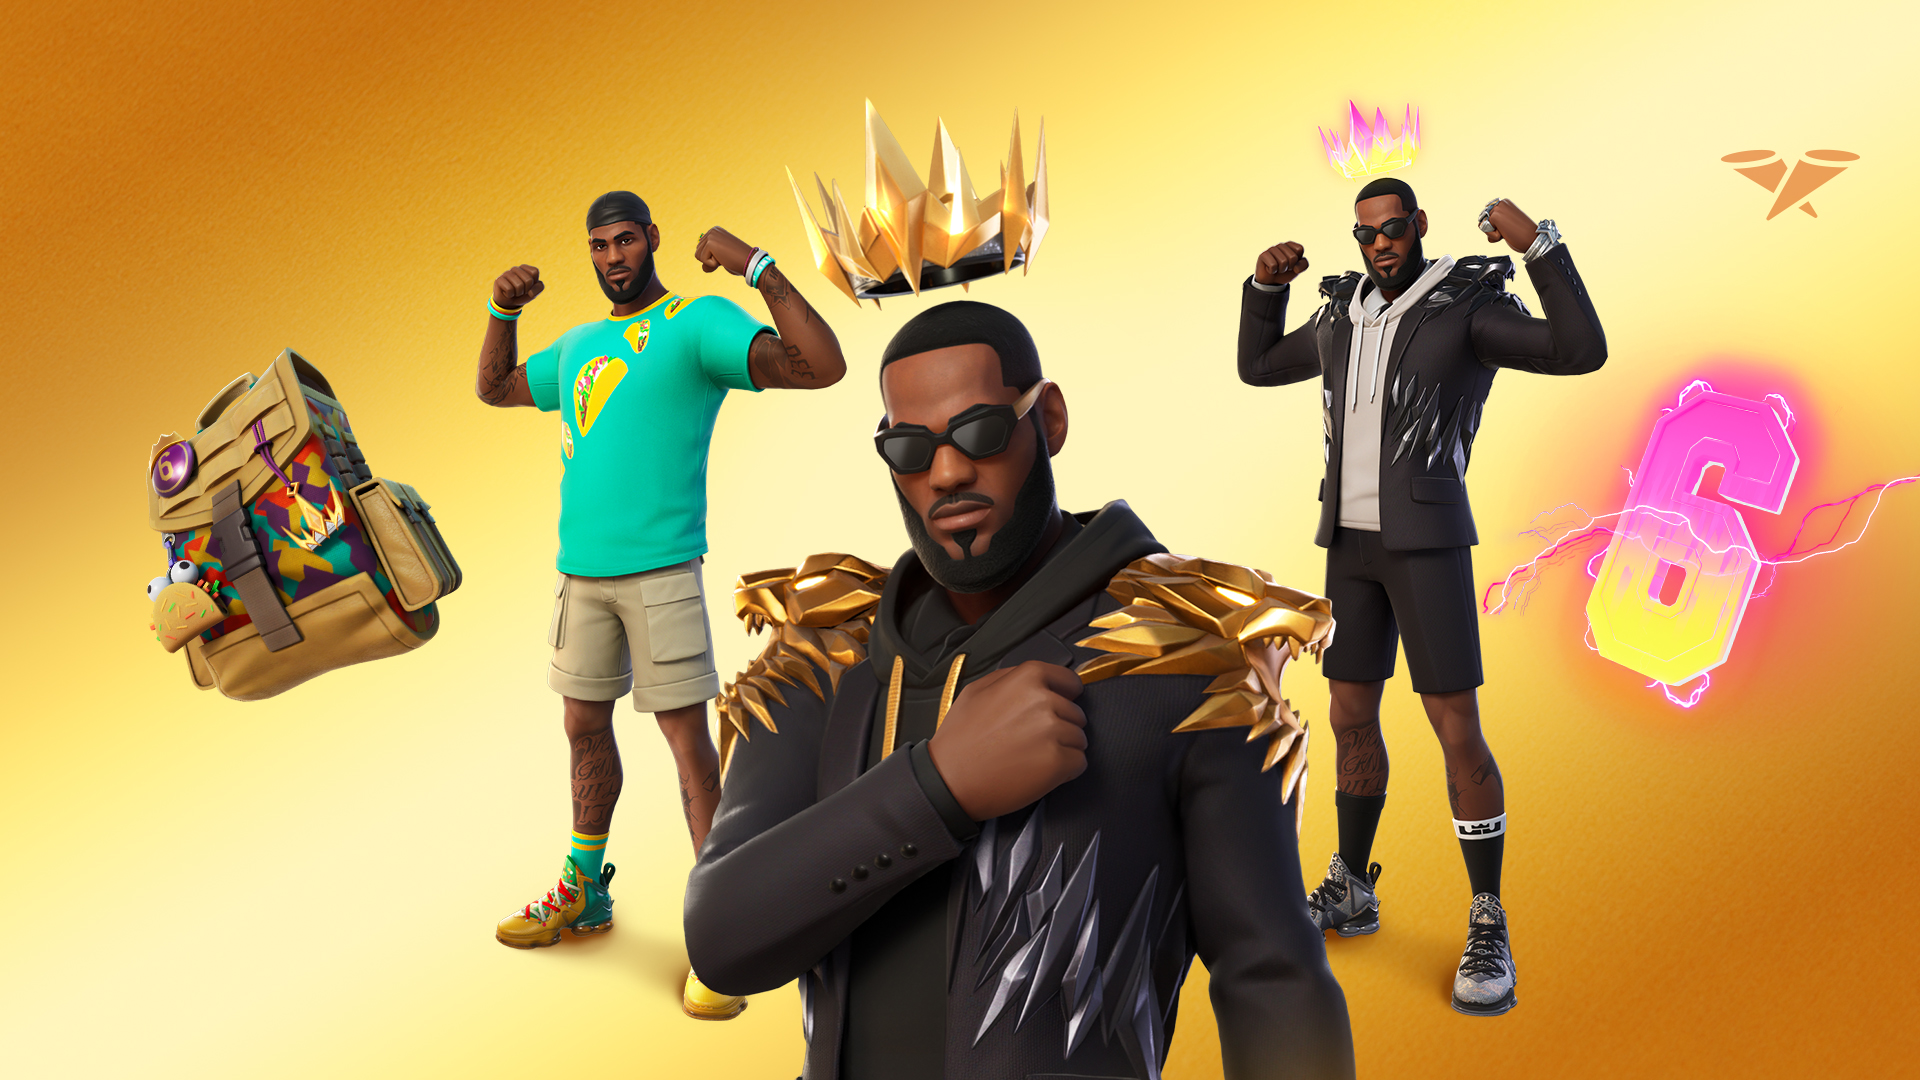 LeBron James Fortnite Icon Series outfits